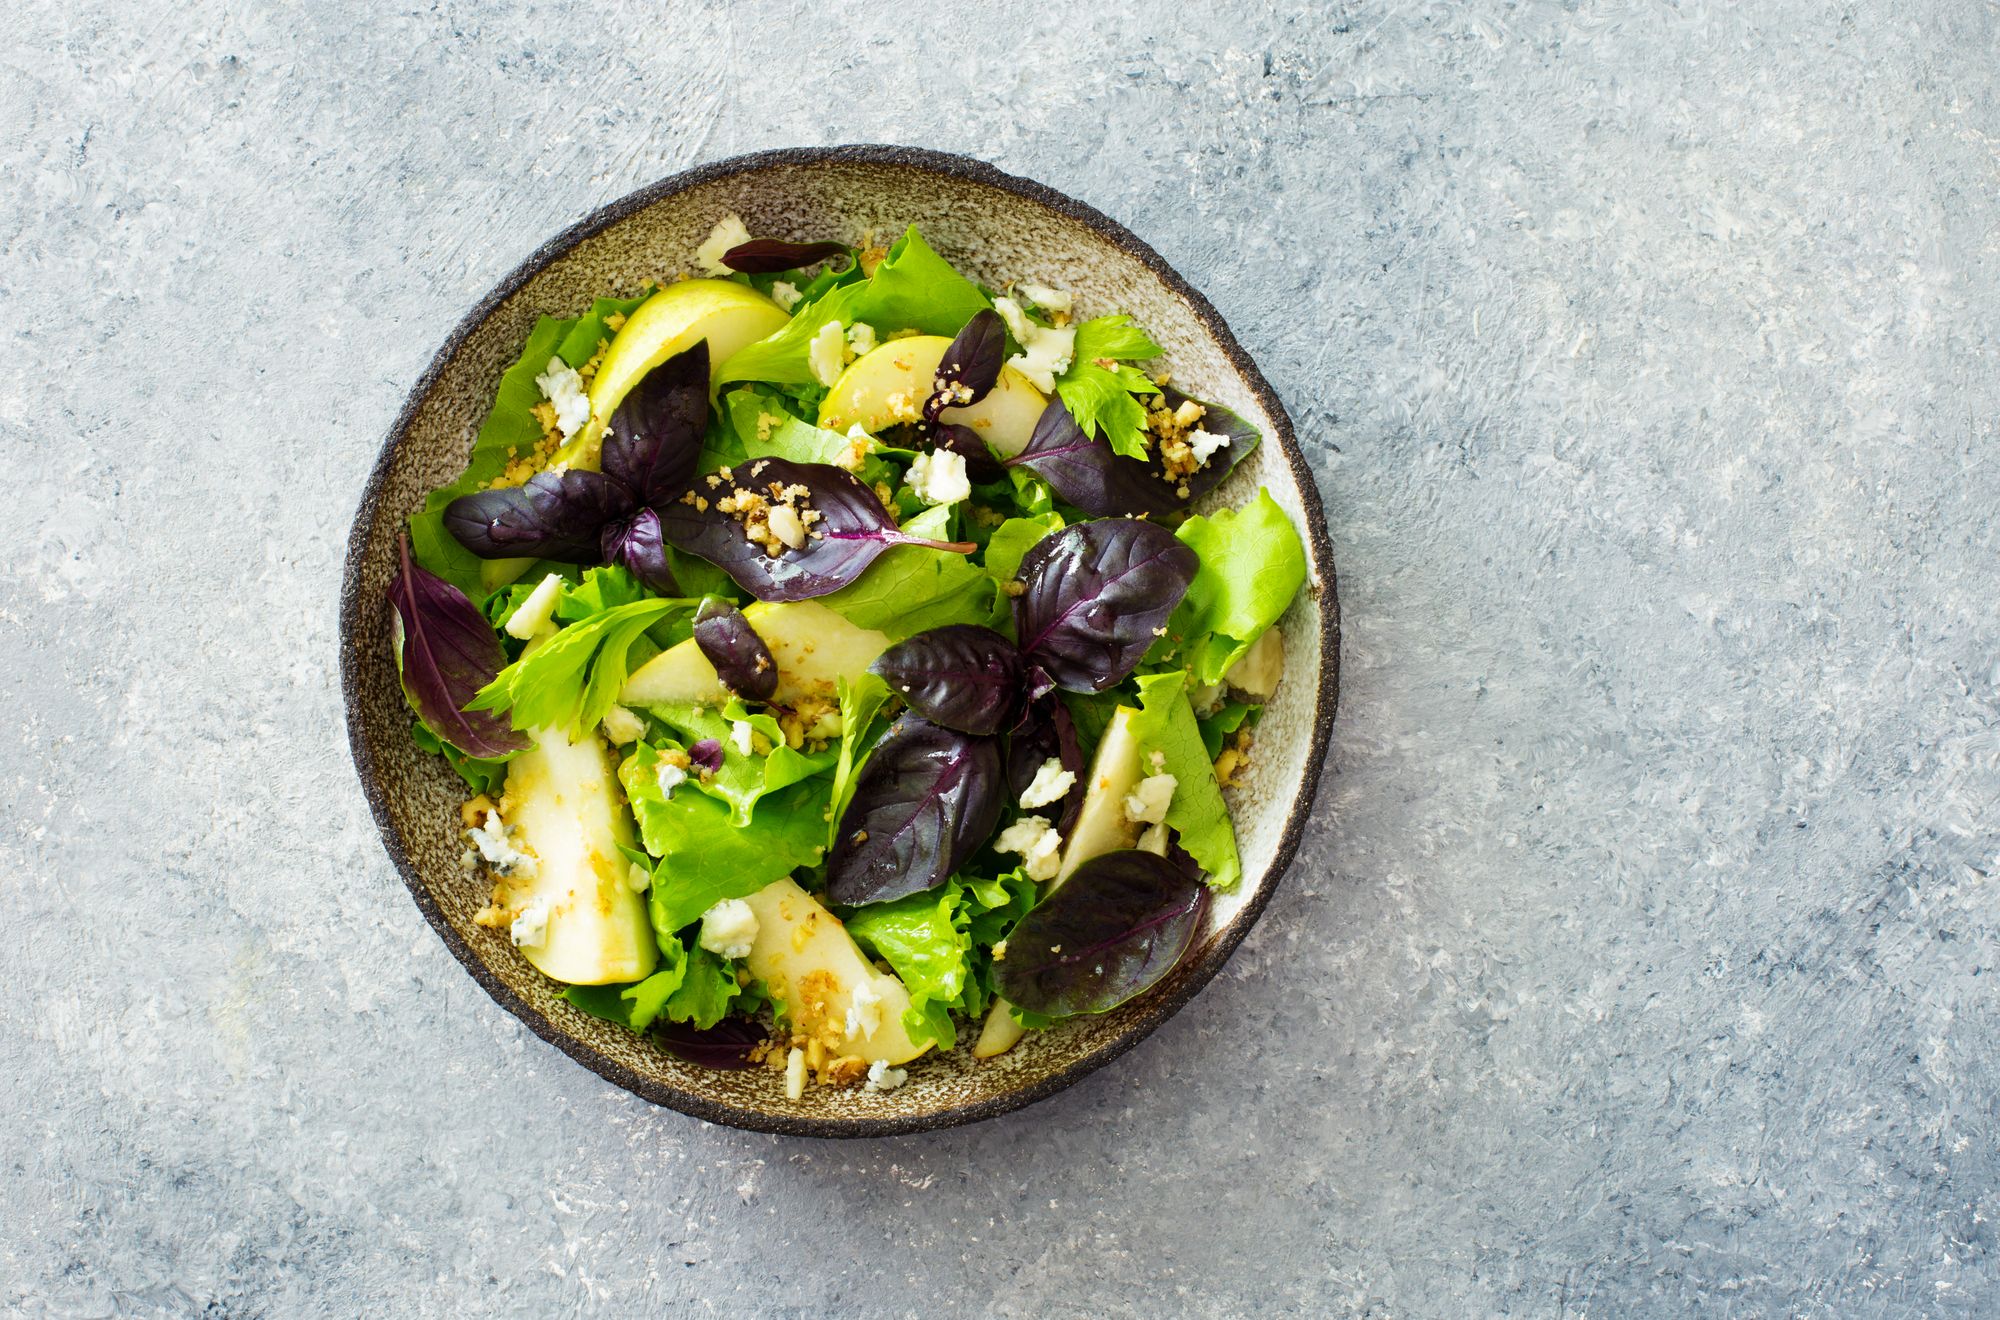 Grilled Pear, Goats’ Cheese, and Hazelnut Salad